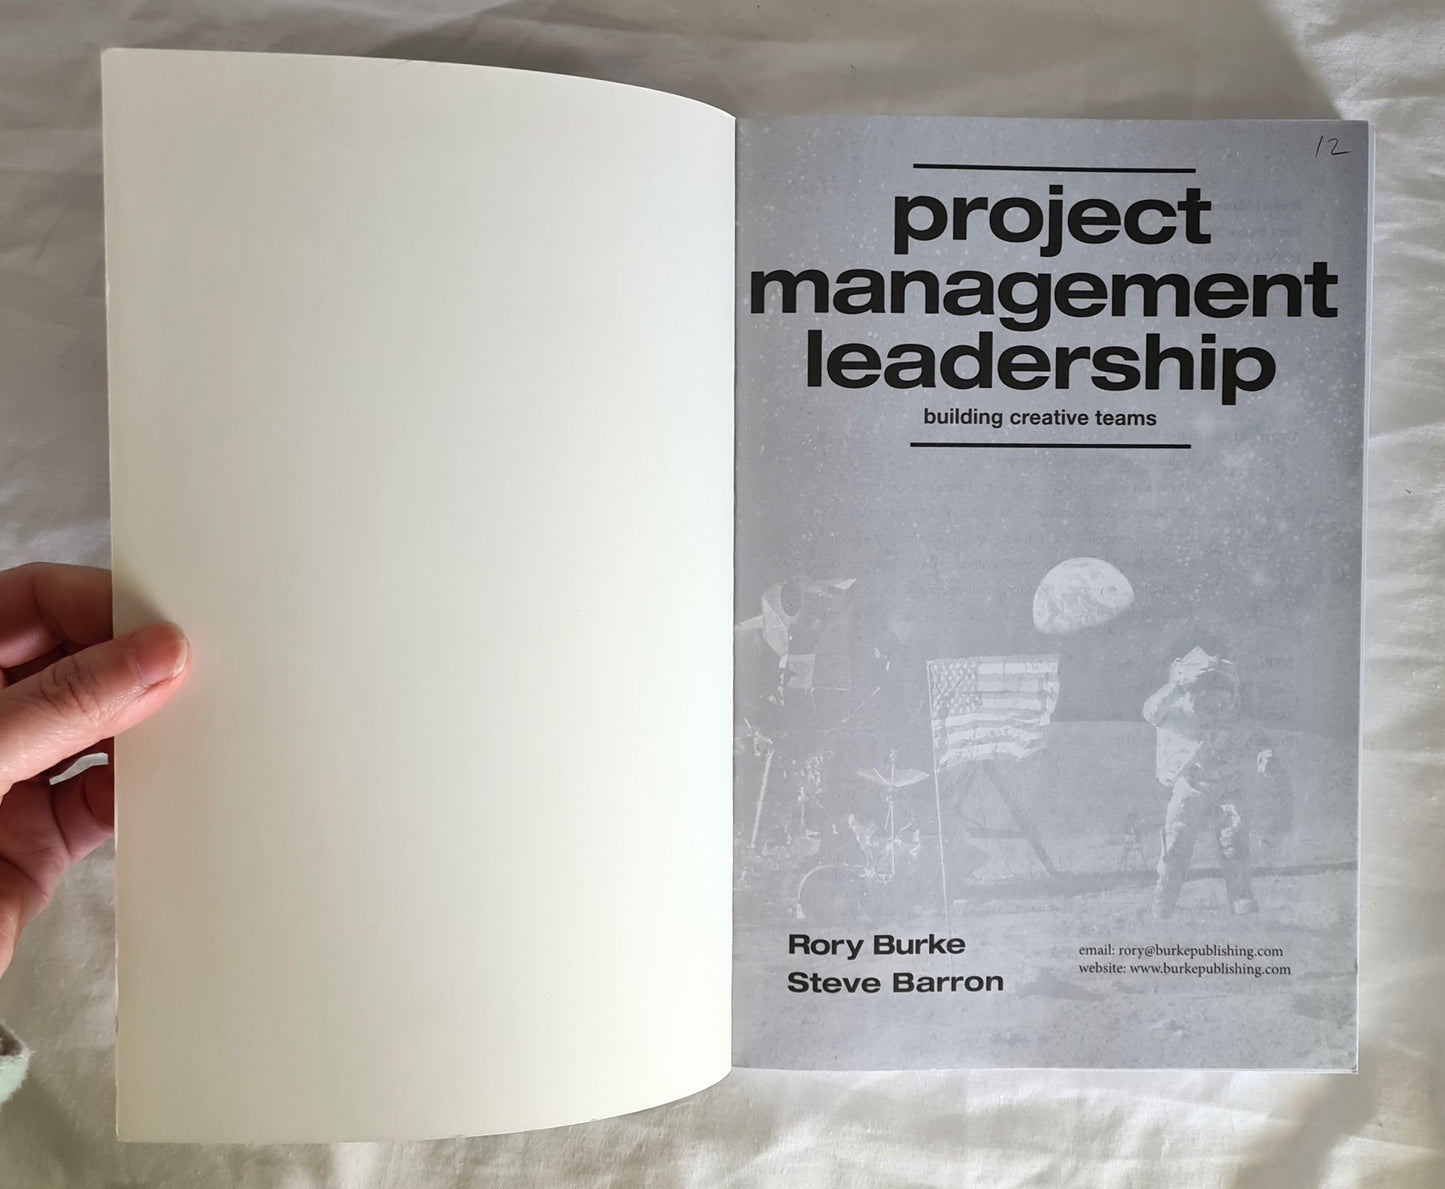 Project Management Leadership by Rory Burke and Steve Barron